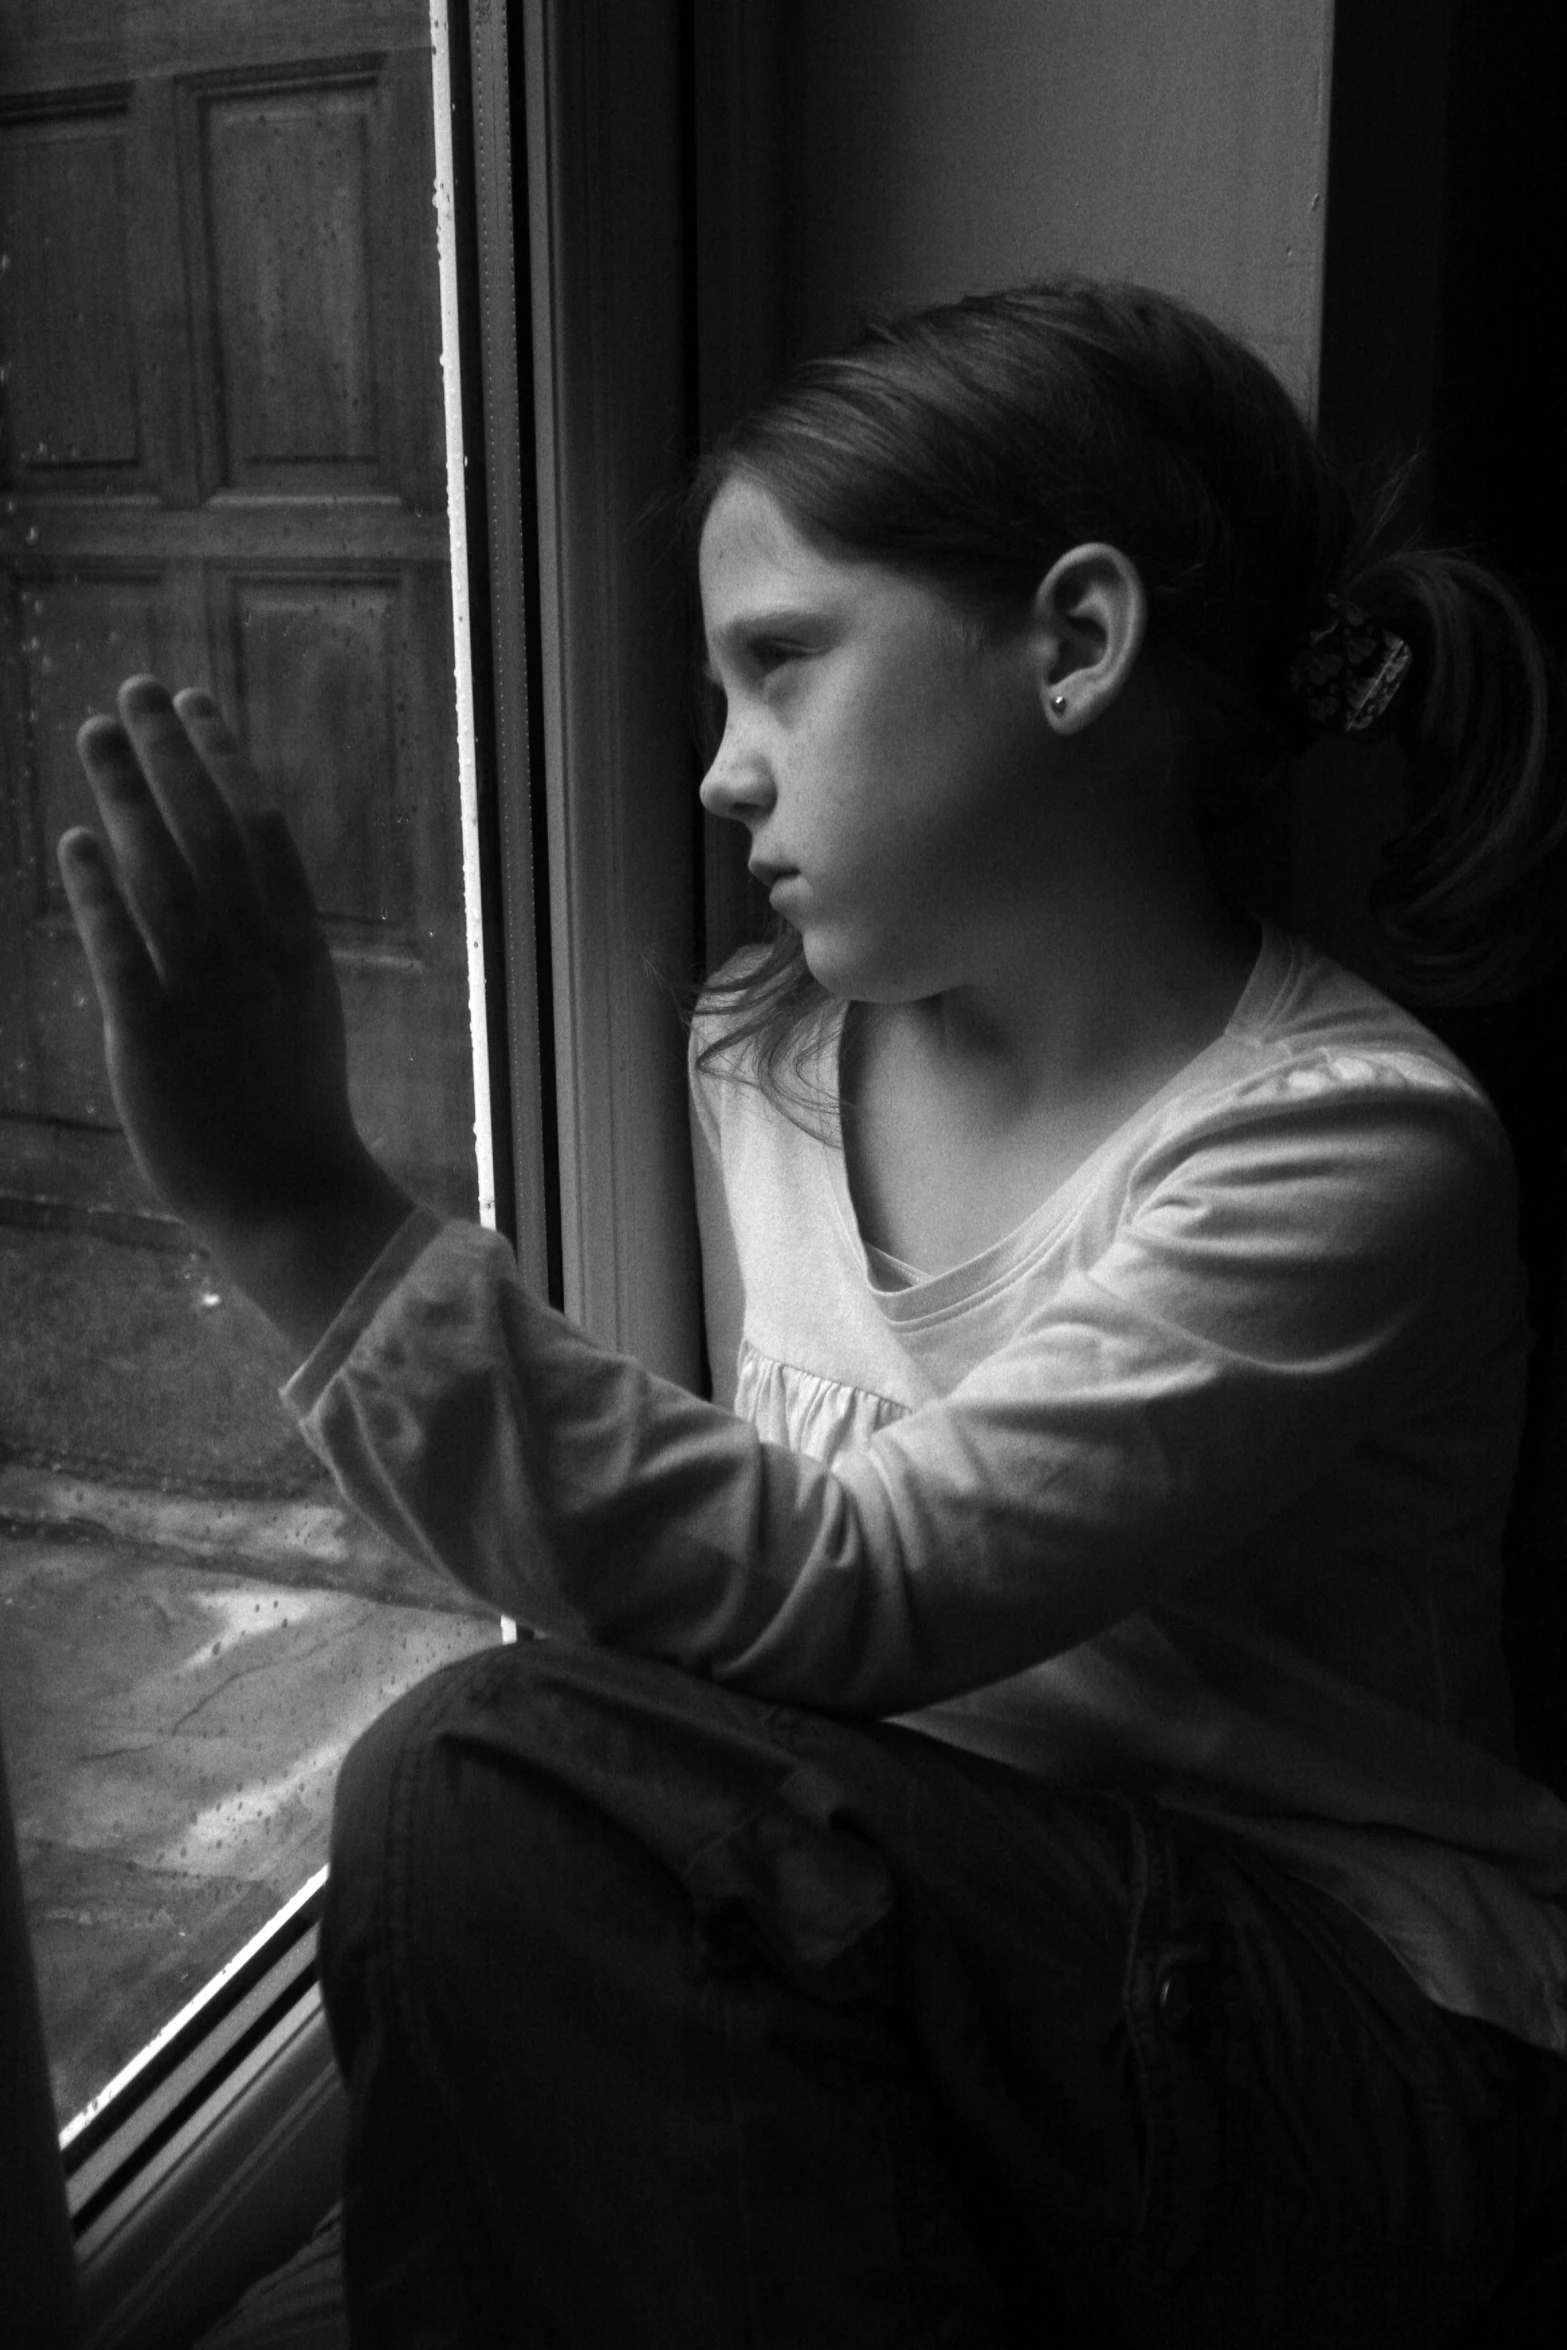 a young woman looks out the window while praying